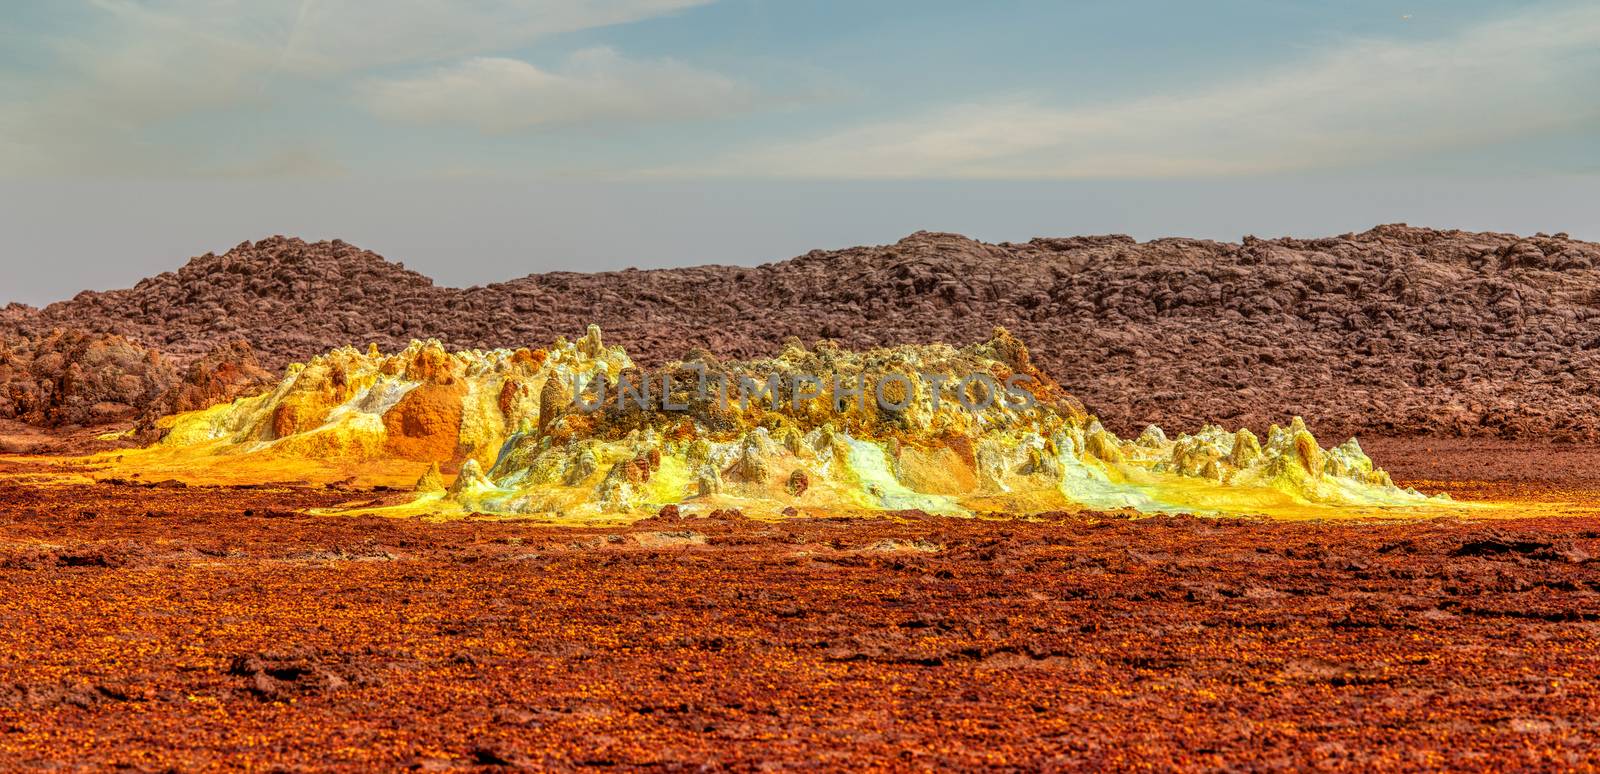 Colorful incredible abstract apocalyptic landscape like moonscape of Dallol Lake in Crater of Dallol Volcano, Danakil Depression, Ethiopia